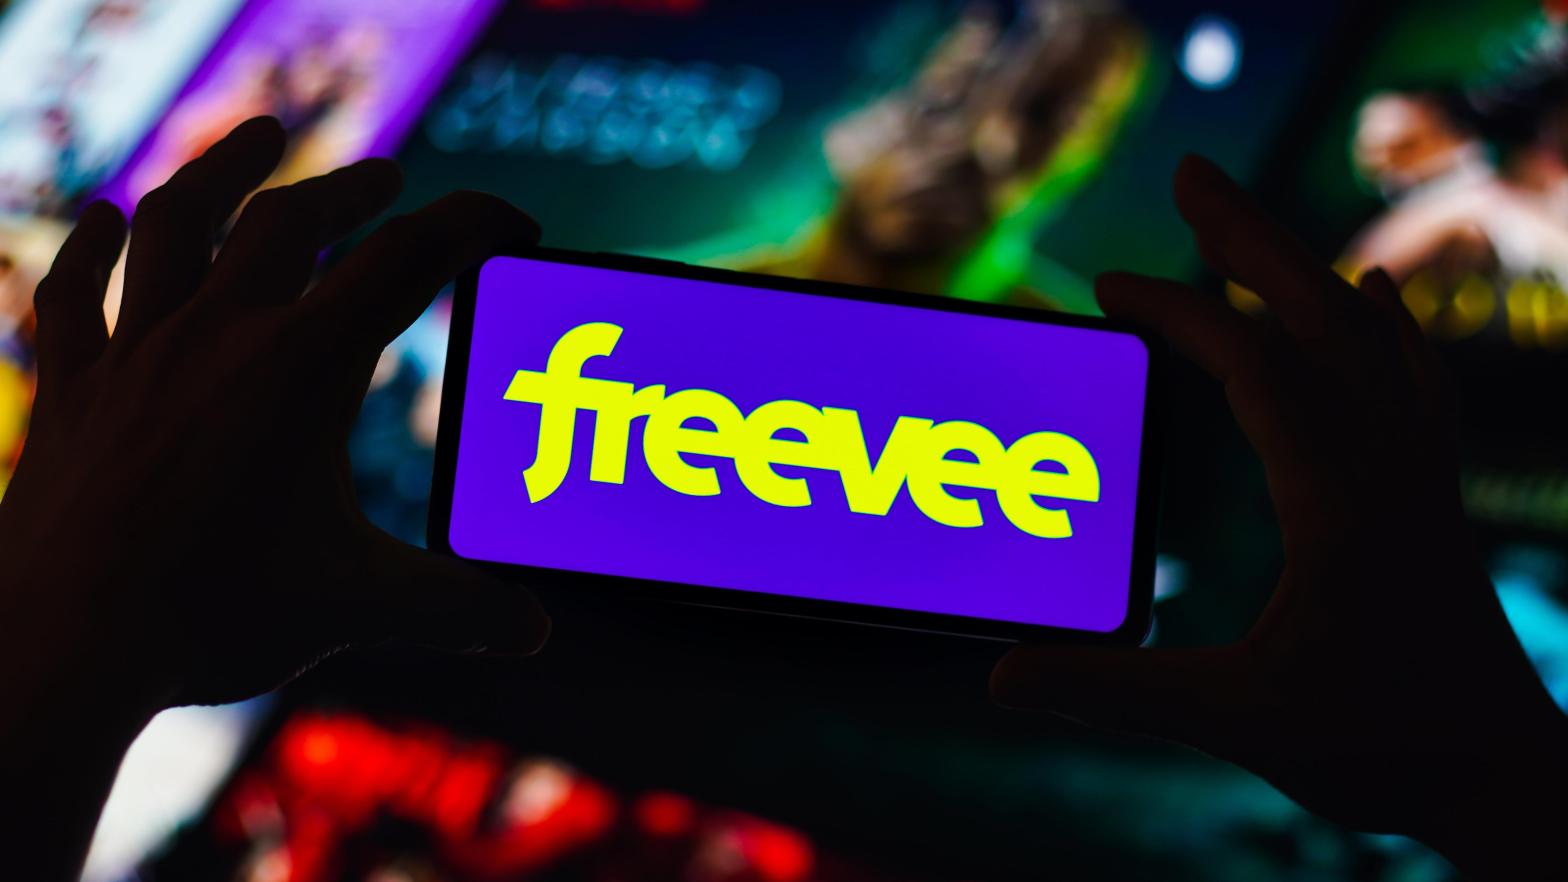 Amazon's Freevee is getting a bit of a boost in while promoting more Prime Video content. (Photo: rafapress, Shutterstock)